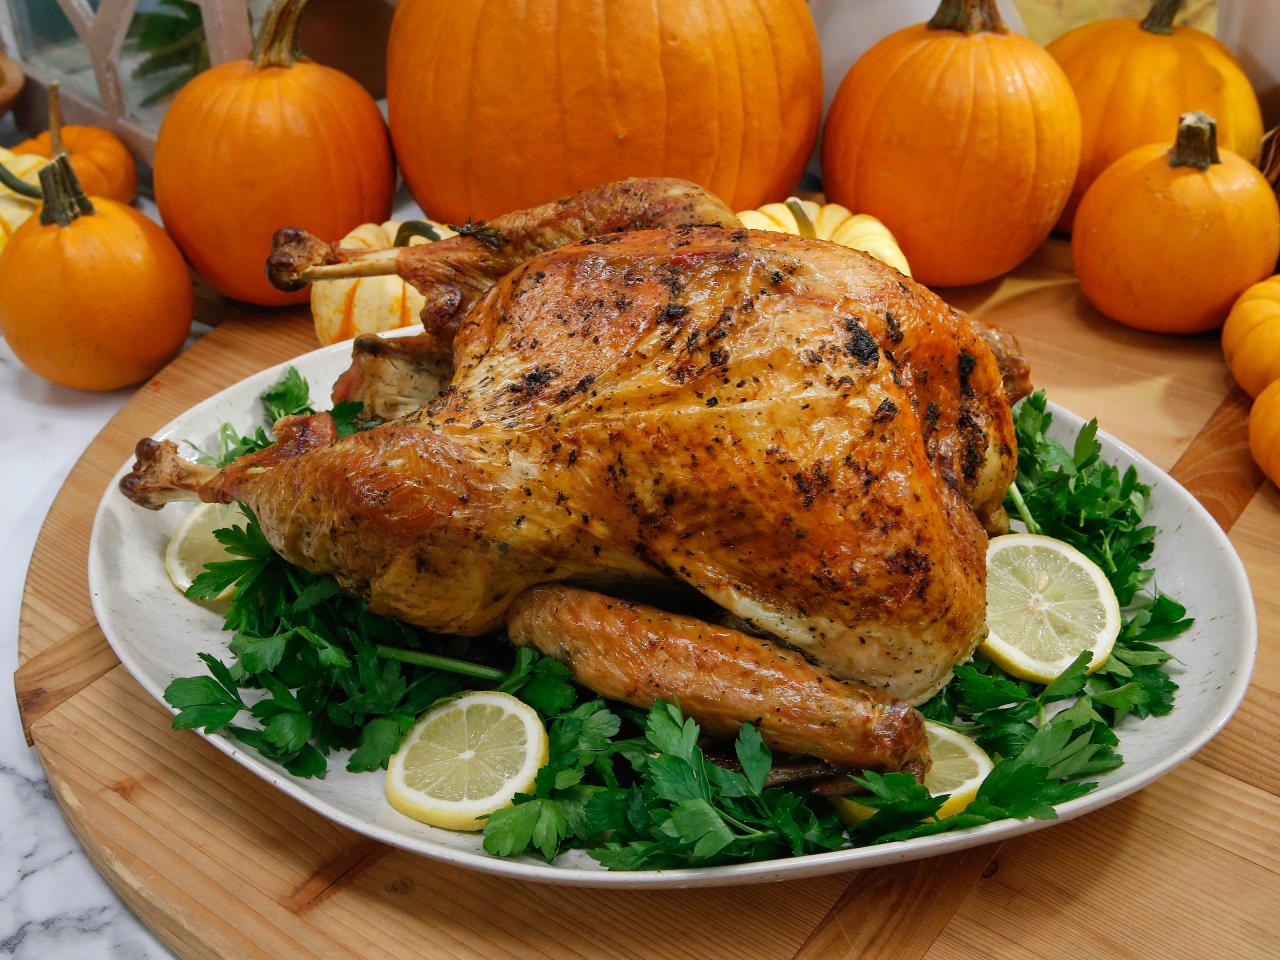 Roasted Thanksgiving Turkey Recipe + Video - Family Fresh Meals